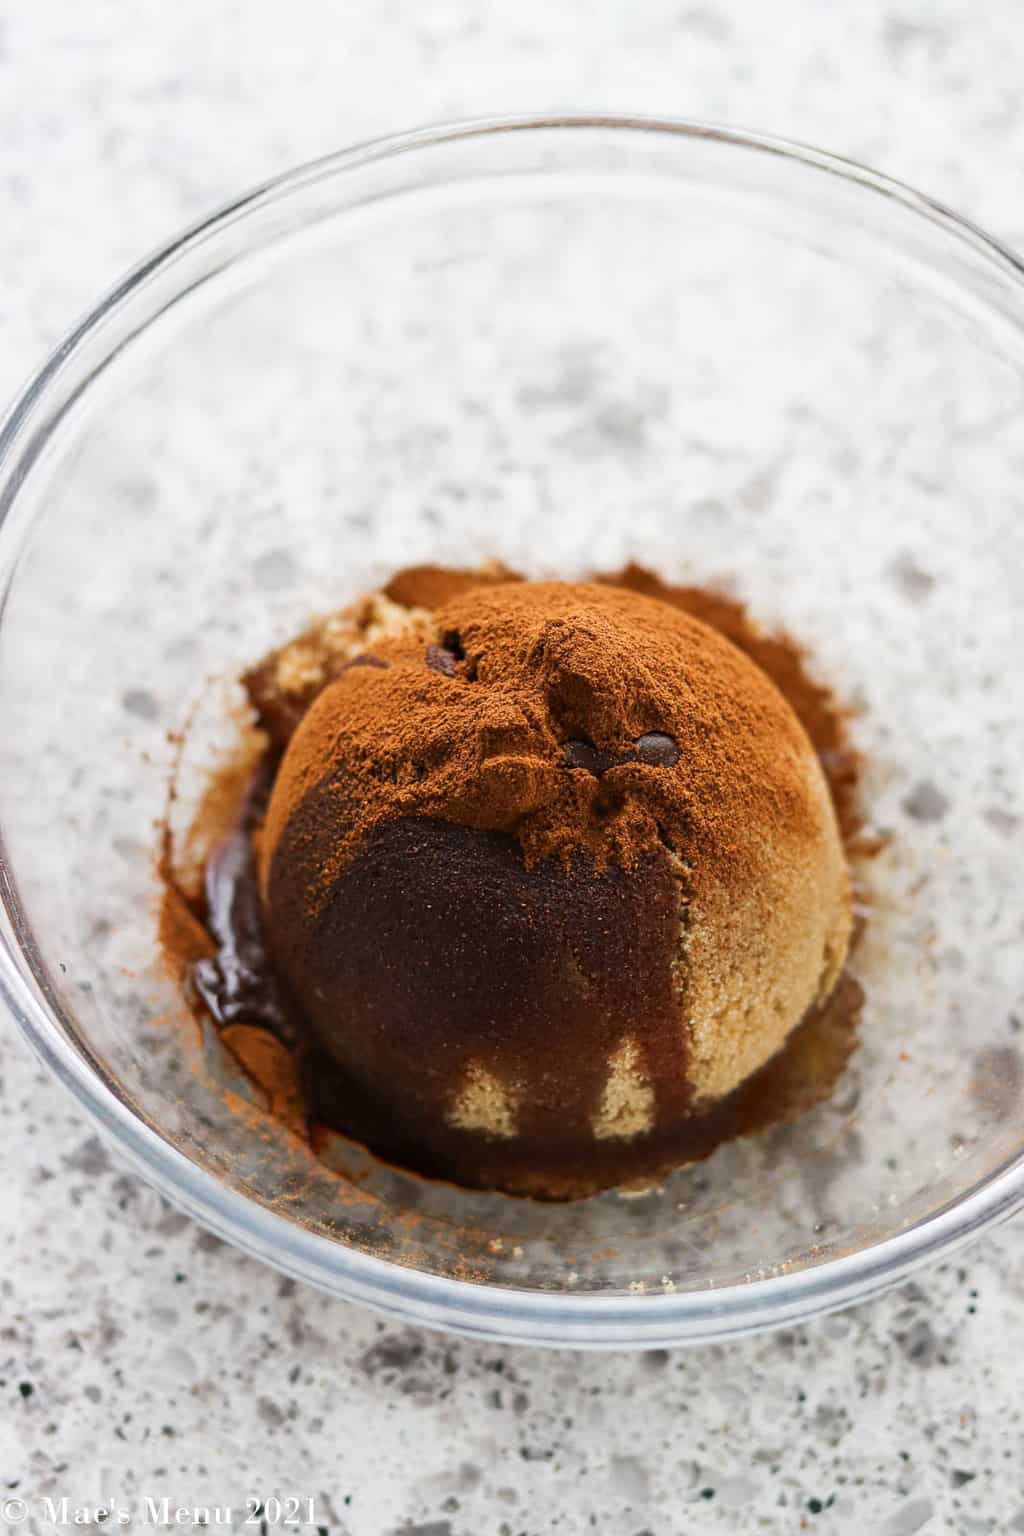 A ball of brown sugar with cinnamon and oil on top